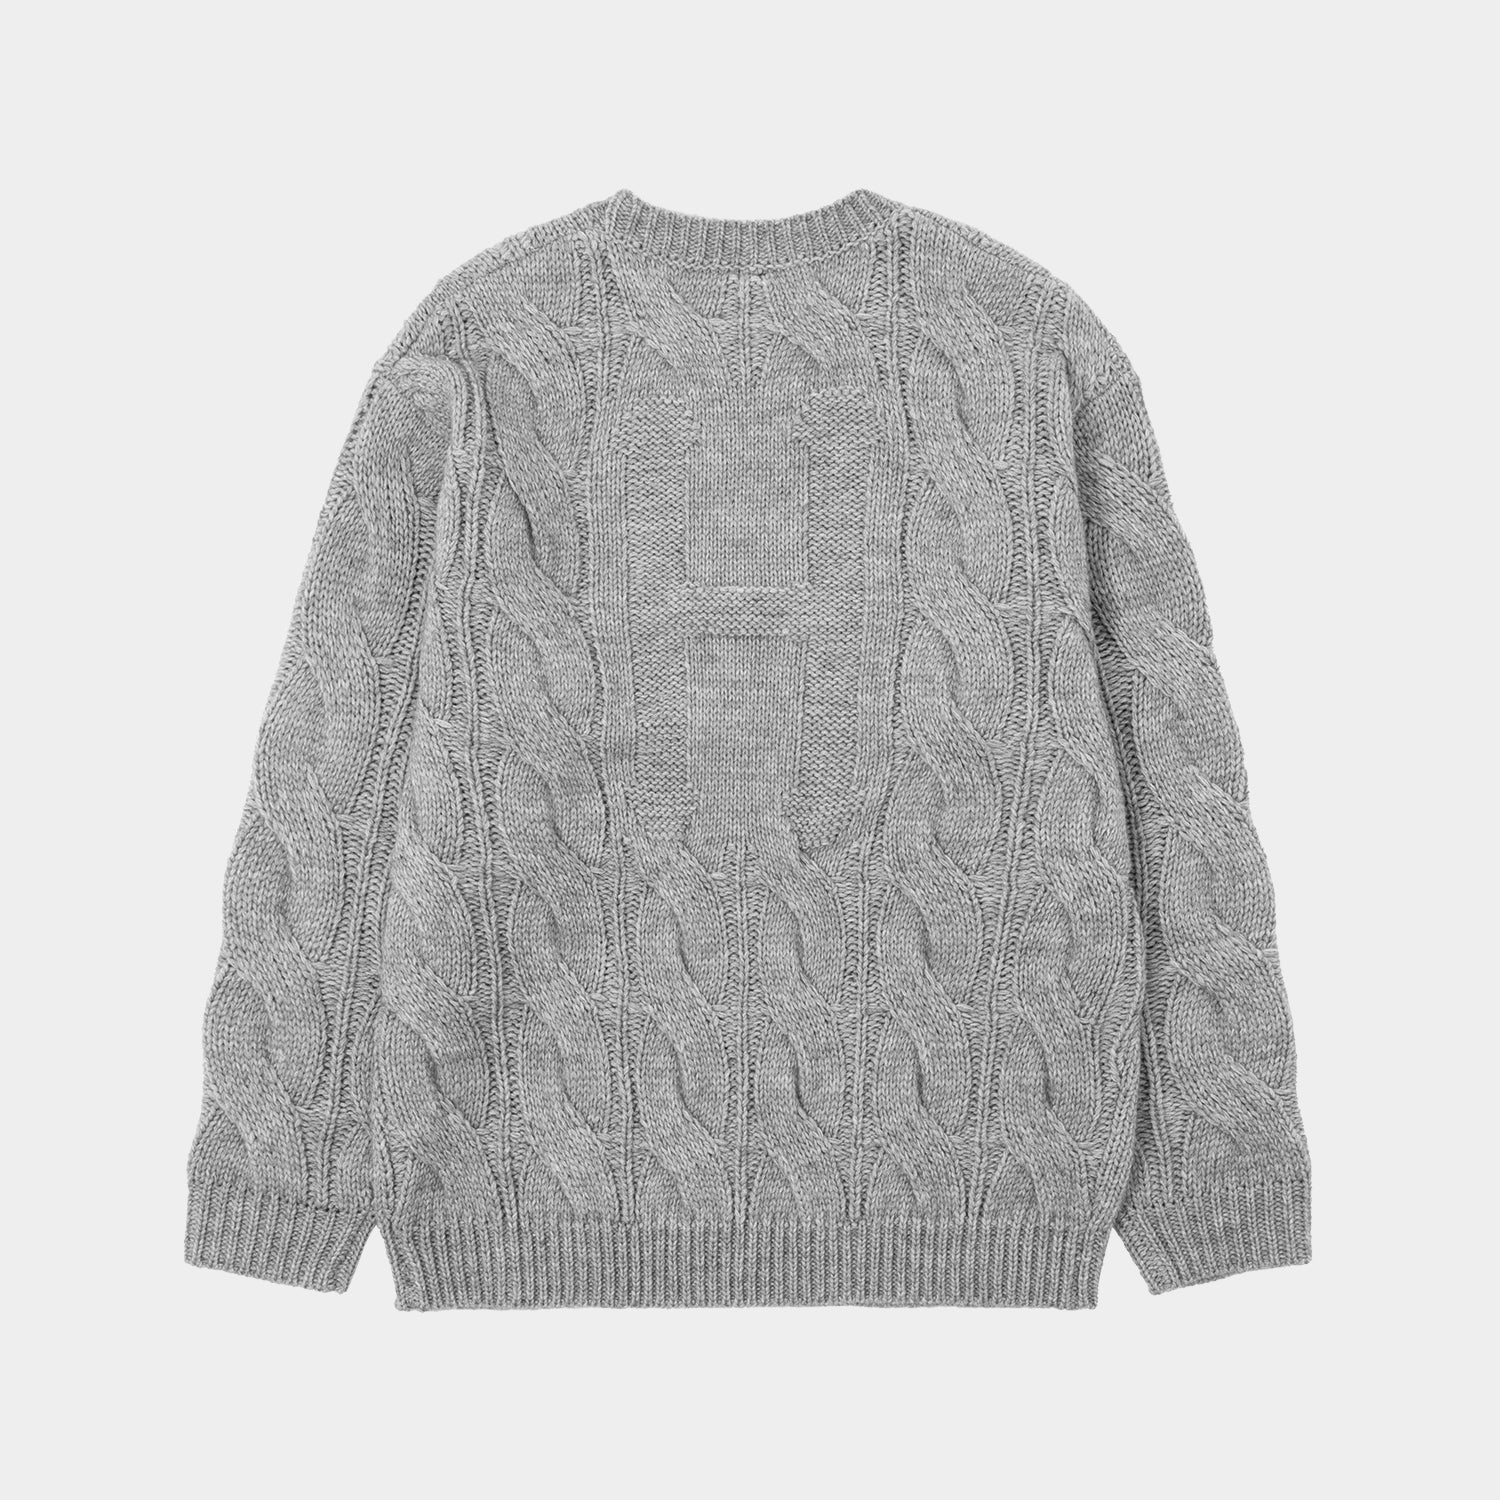 CLASSIC H CABLE SWEATER - HUF Worldwide JP